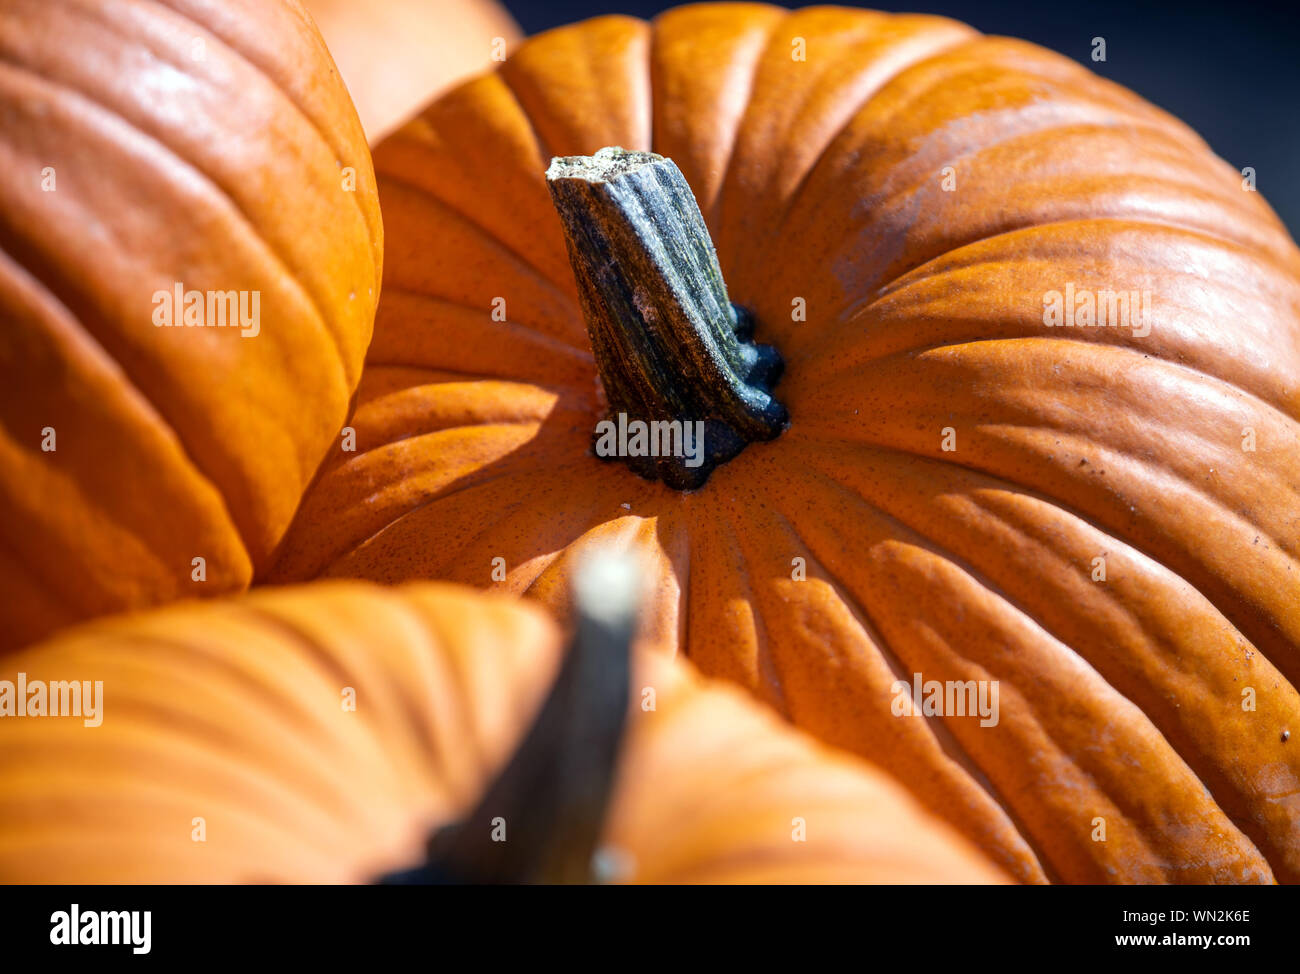 05 September 2019, Mecklenburg-Western Pomerania, Rövershagen: Large pumpkins lie on the market square in Karl's adventure village. The pumpkin season officially starts here at the weekend. Four giant pumpkin figures on the theme 'Olympic Games' have already been set up. The figures have a size of up to 5 meters and consist of hundreds of pumpkins. Photo: Jens Büttner/dpa-Zentralbild/dpa Stock Photo